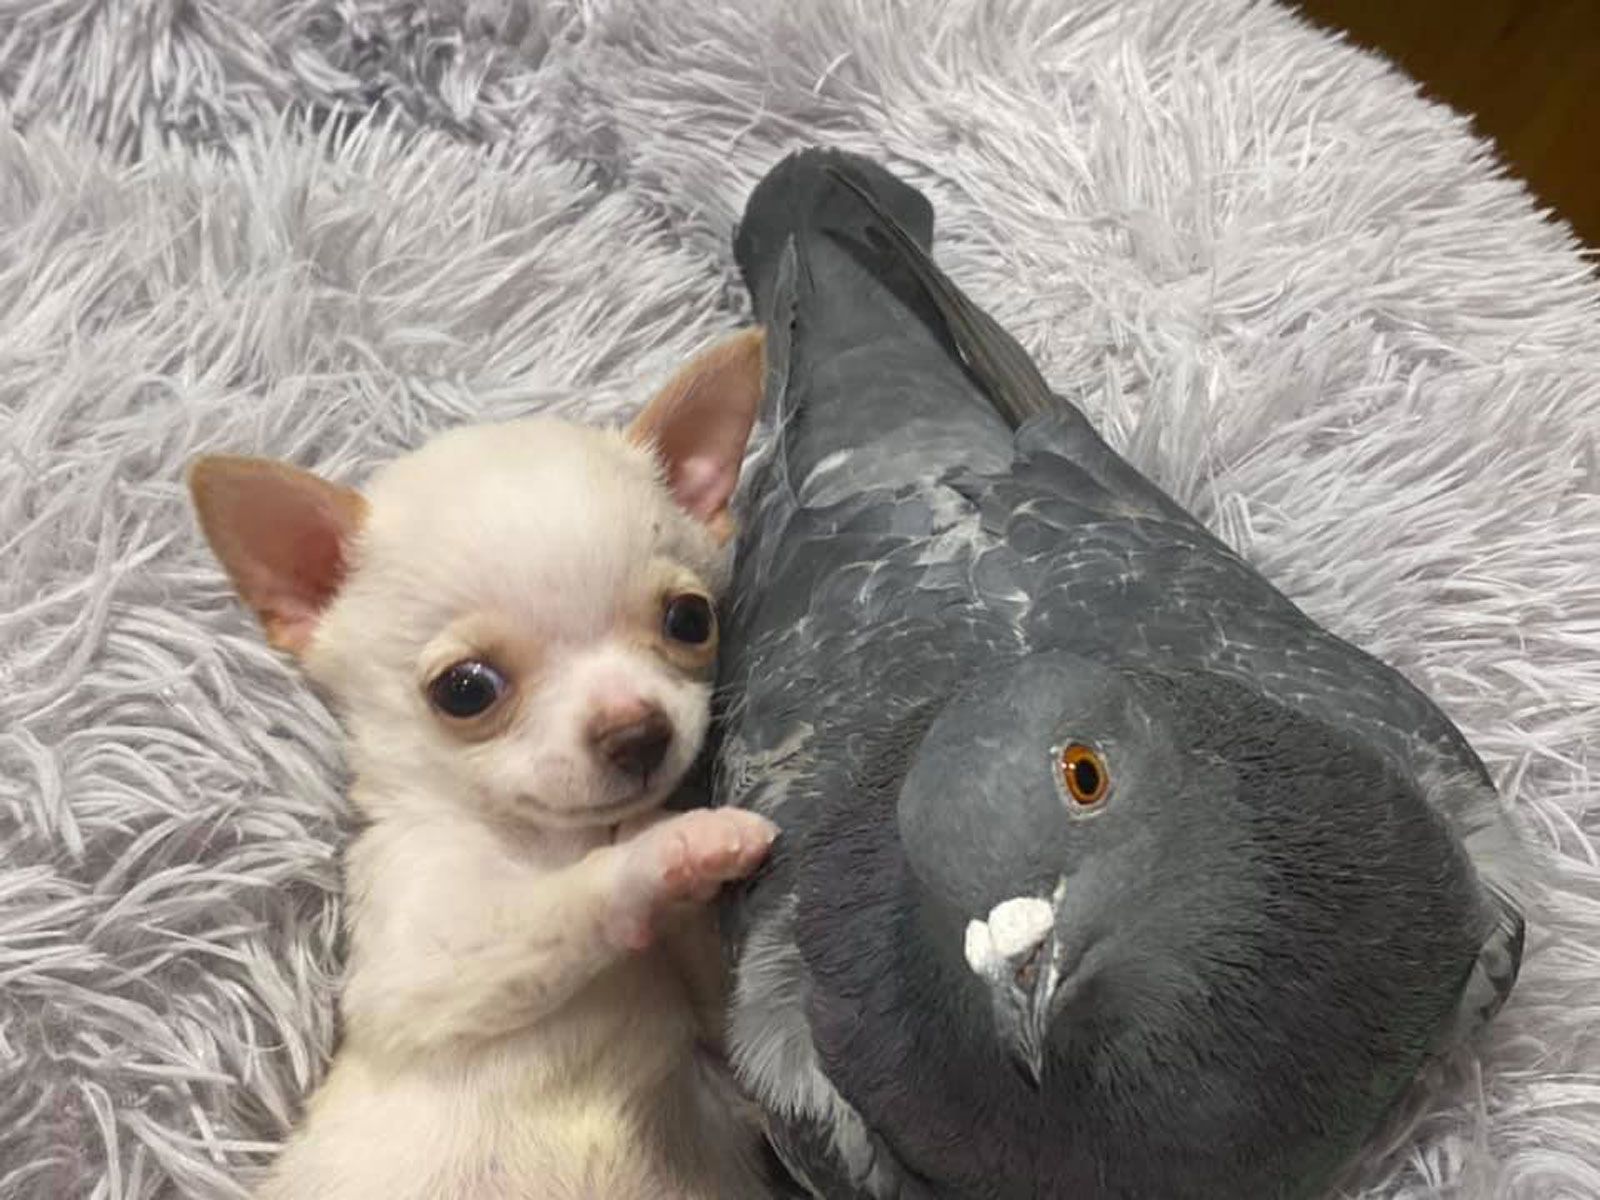 A pigeon that can't fly befriended a puppy that can't walk. Yes, it's as  cute as it sounds | CNN